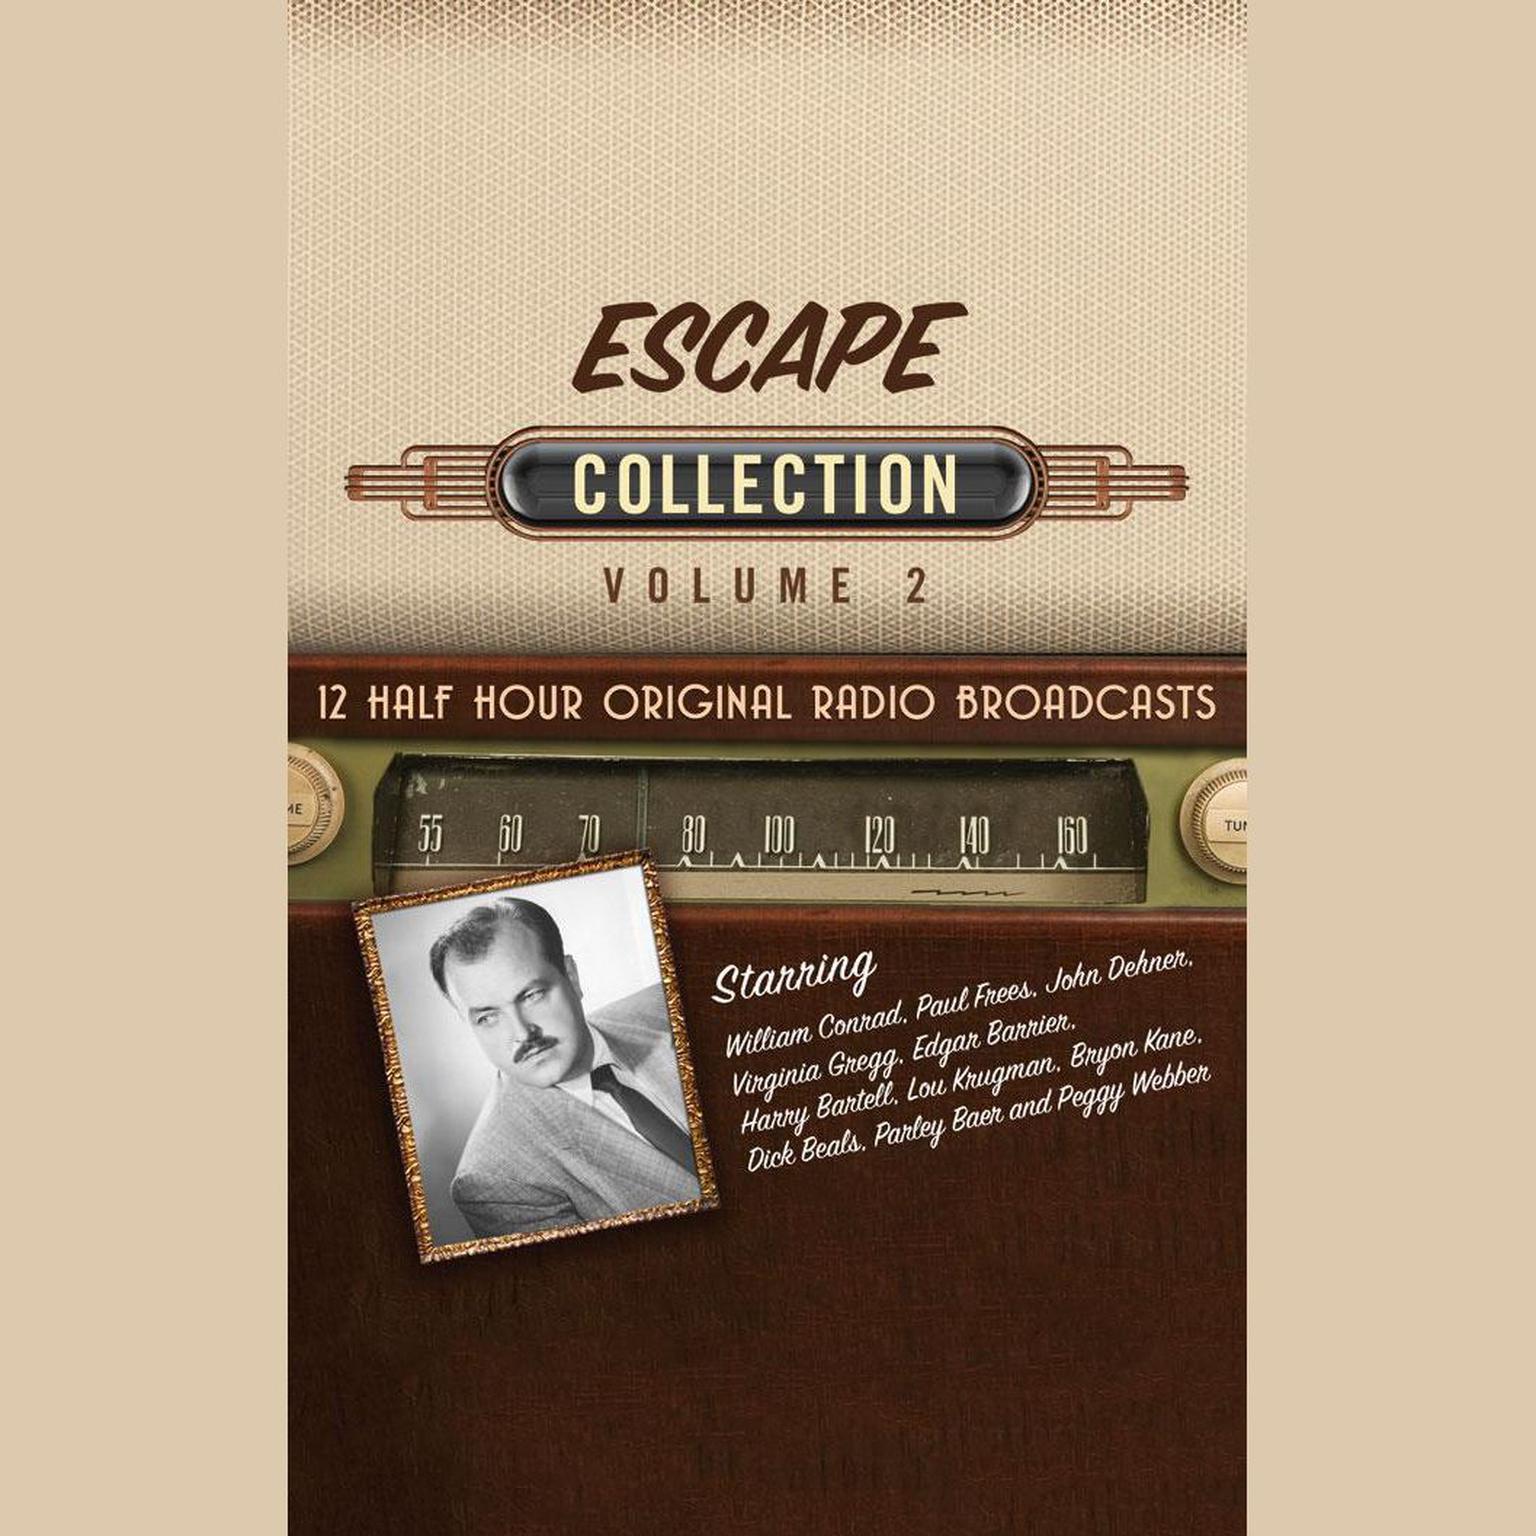 Escape, Collection 2 Audiobook, by Black Eye Entertainment